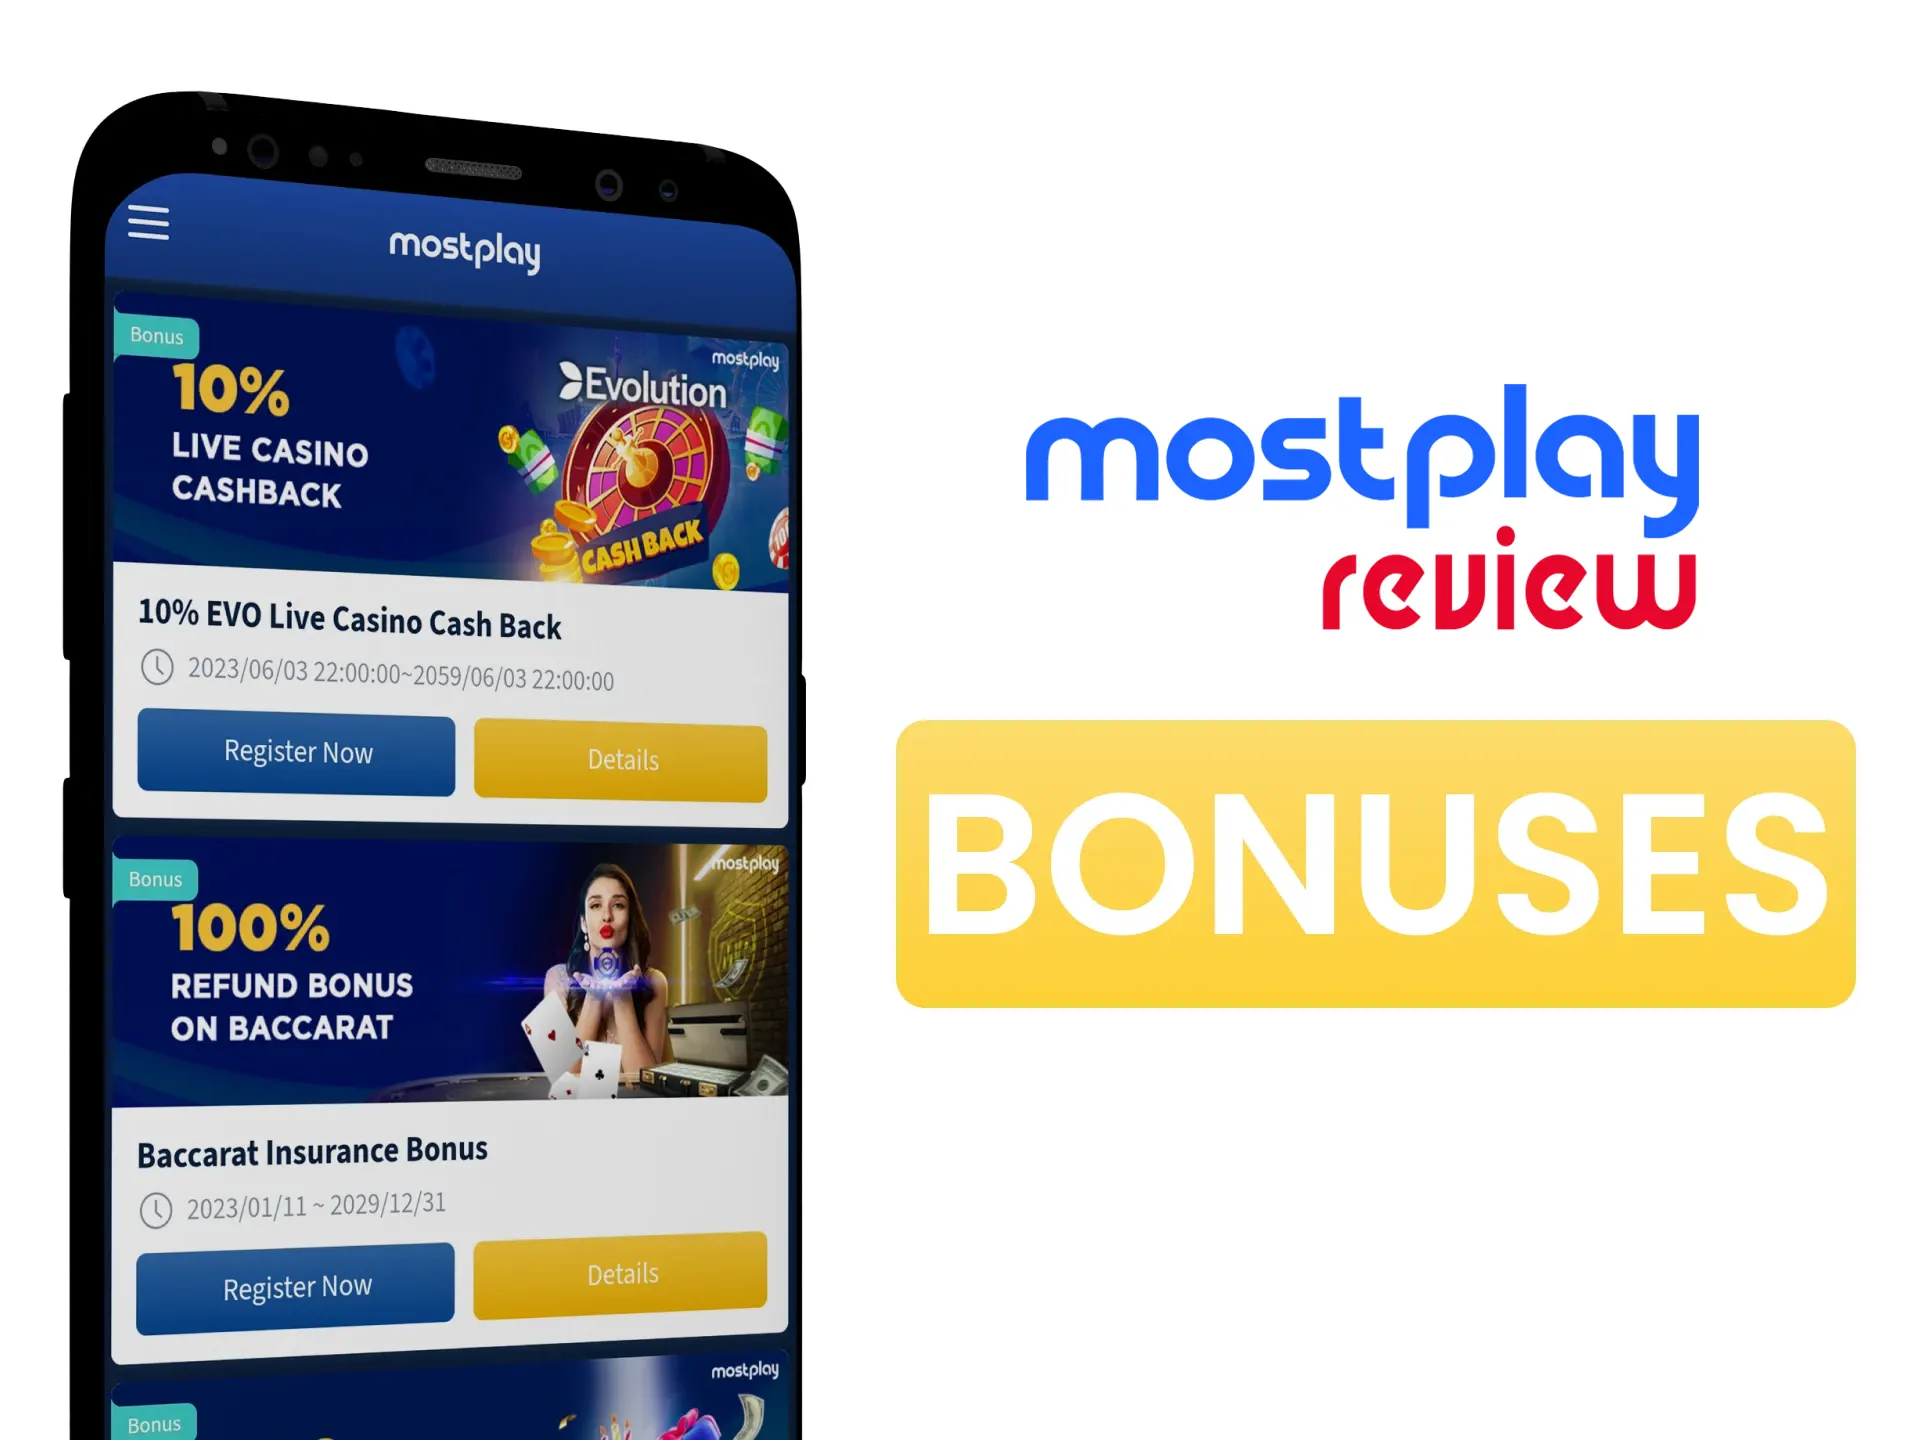 Claim all of the Mostplay bonuses from the special page.